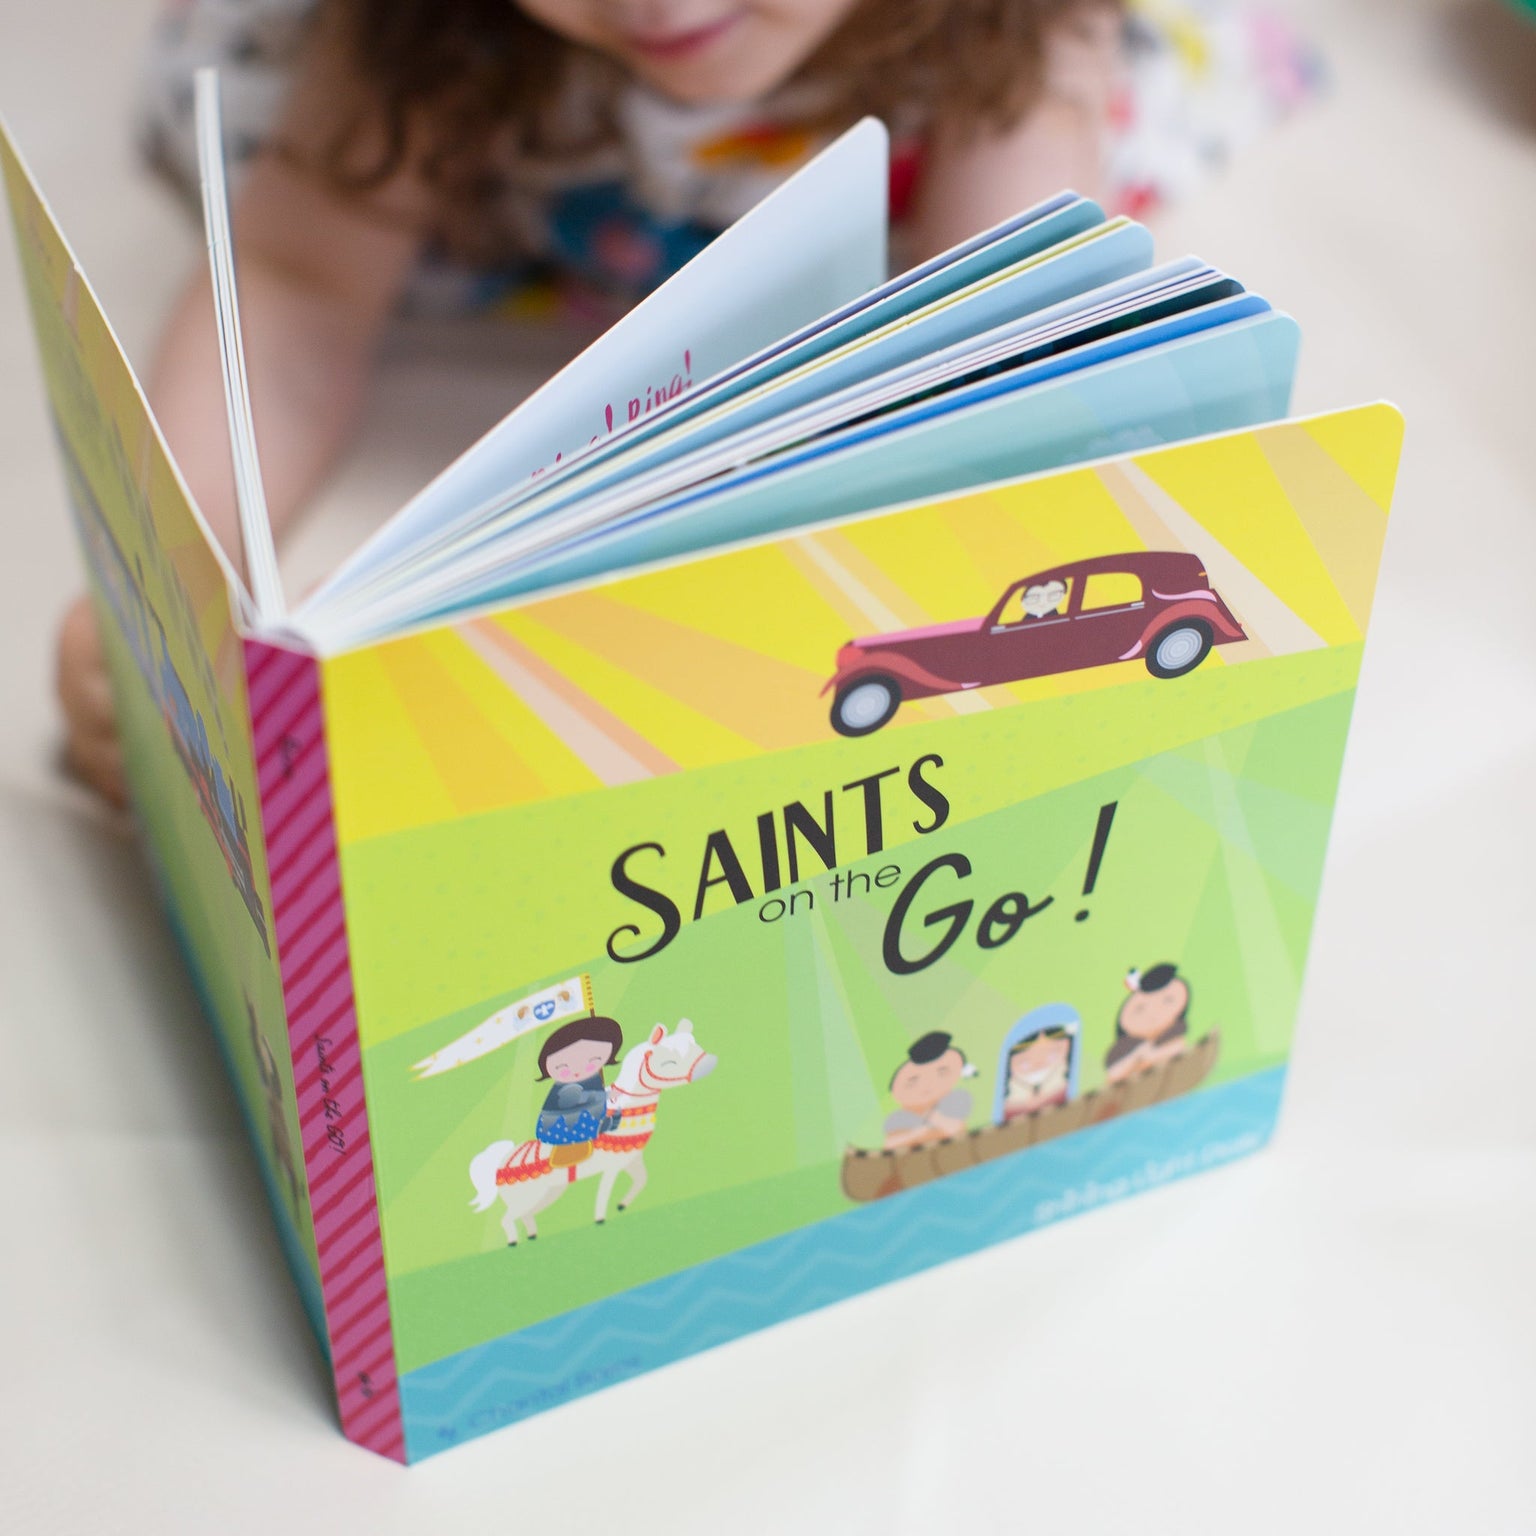 Saints on the Go! Board Book